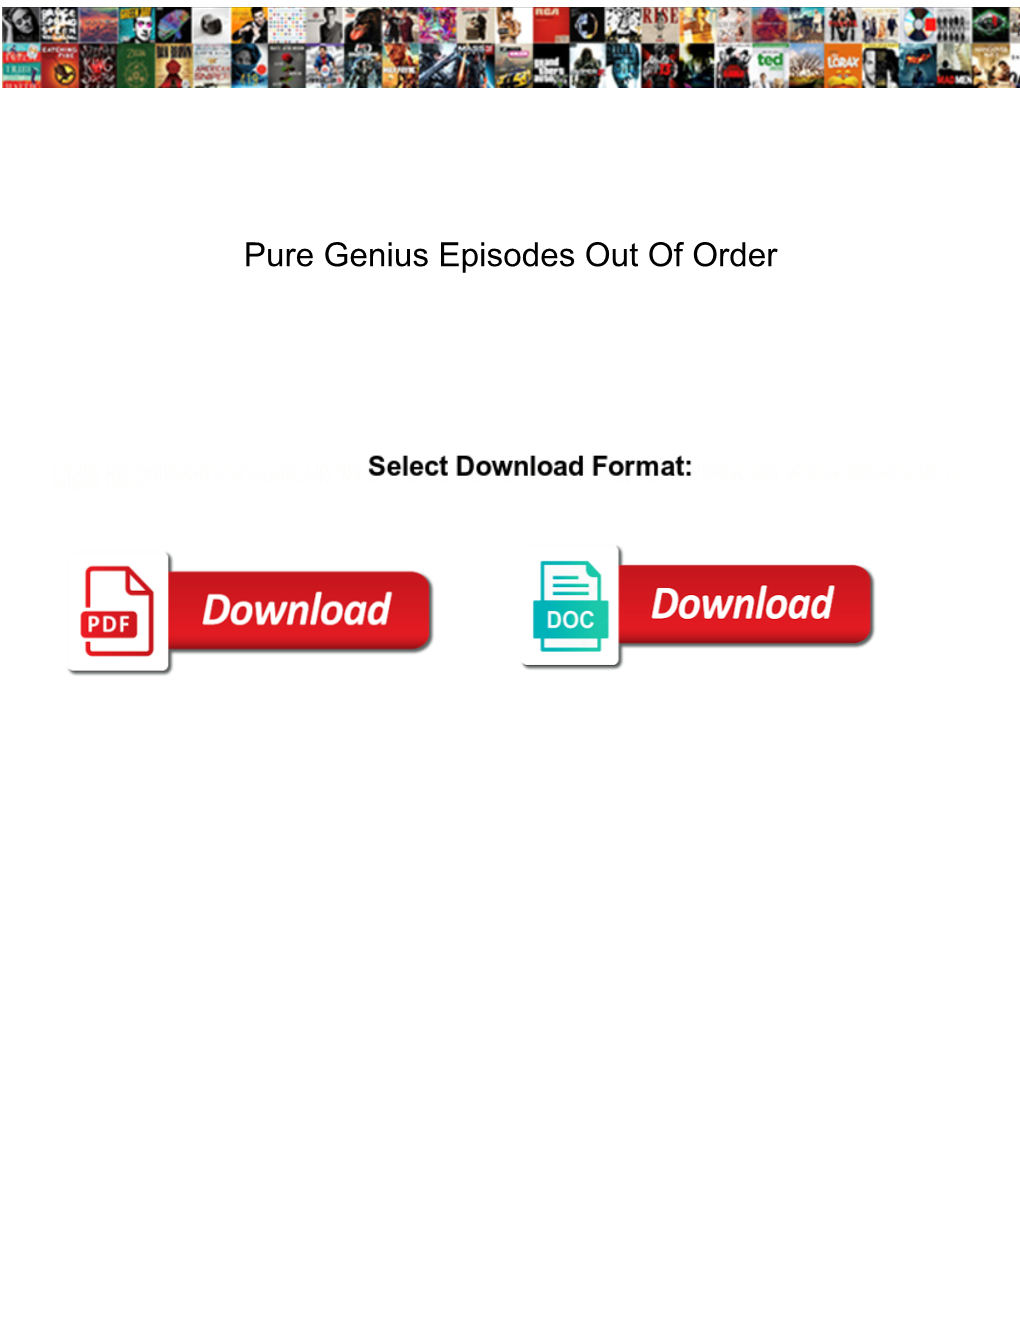 Pure Genius Episodes out of Order